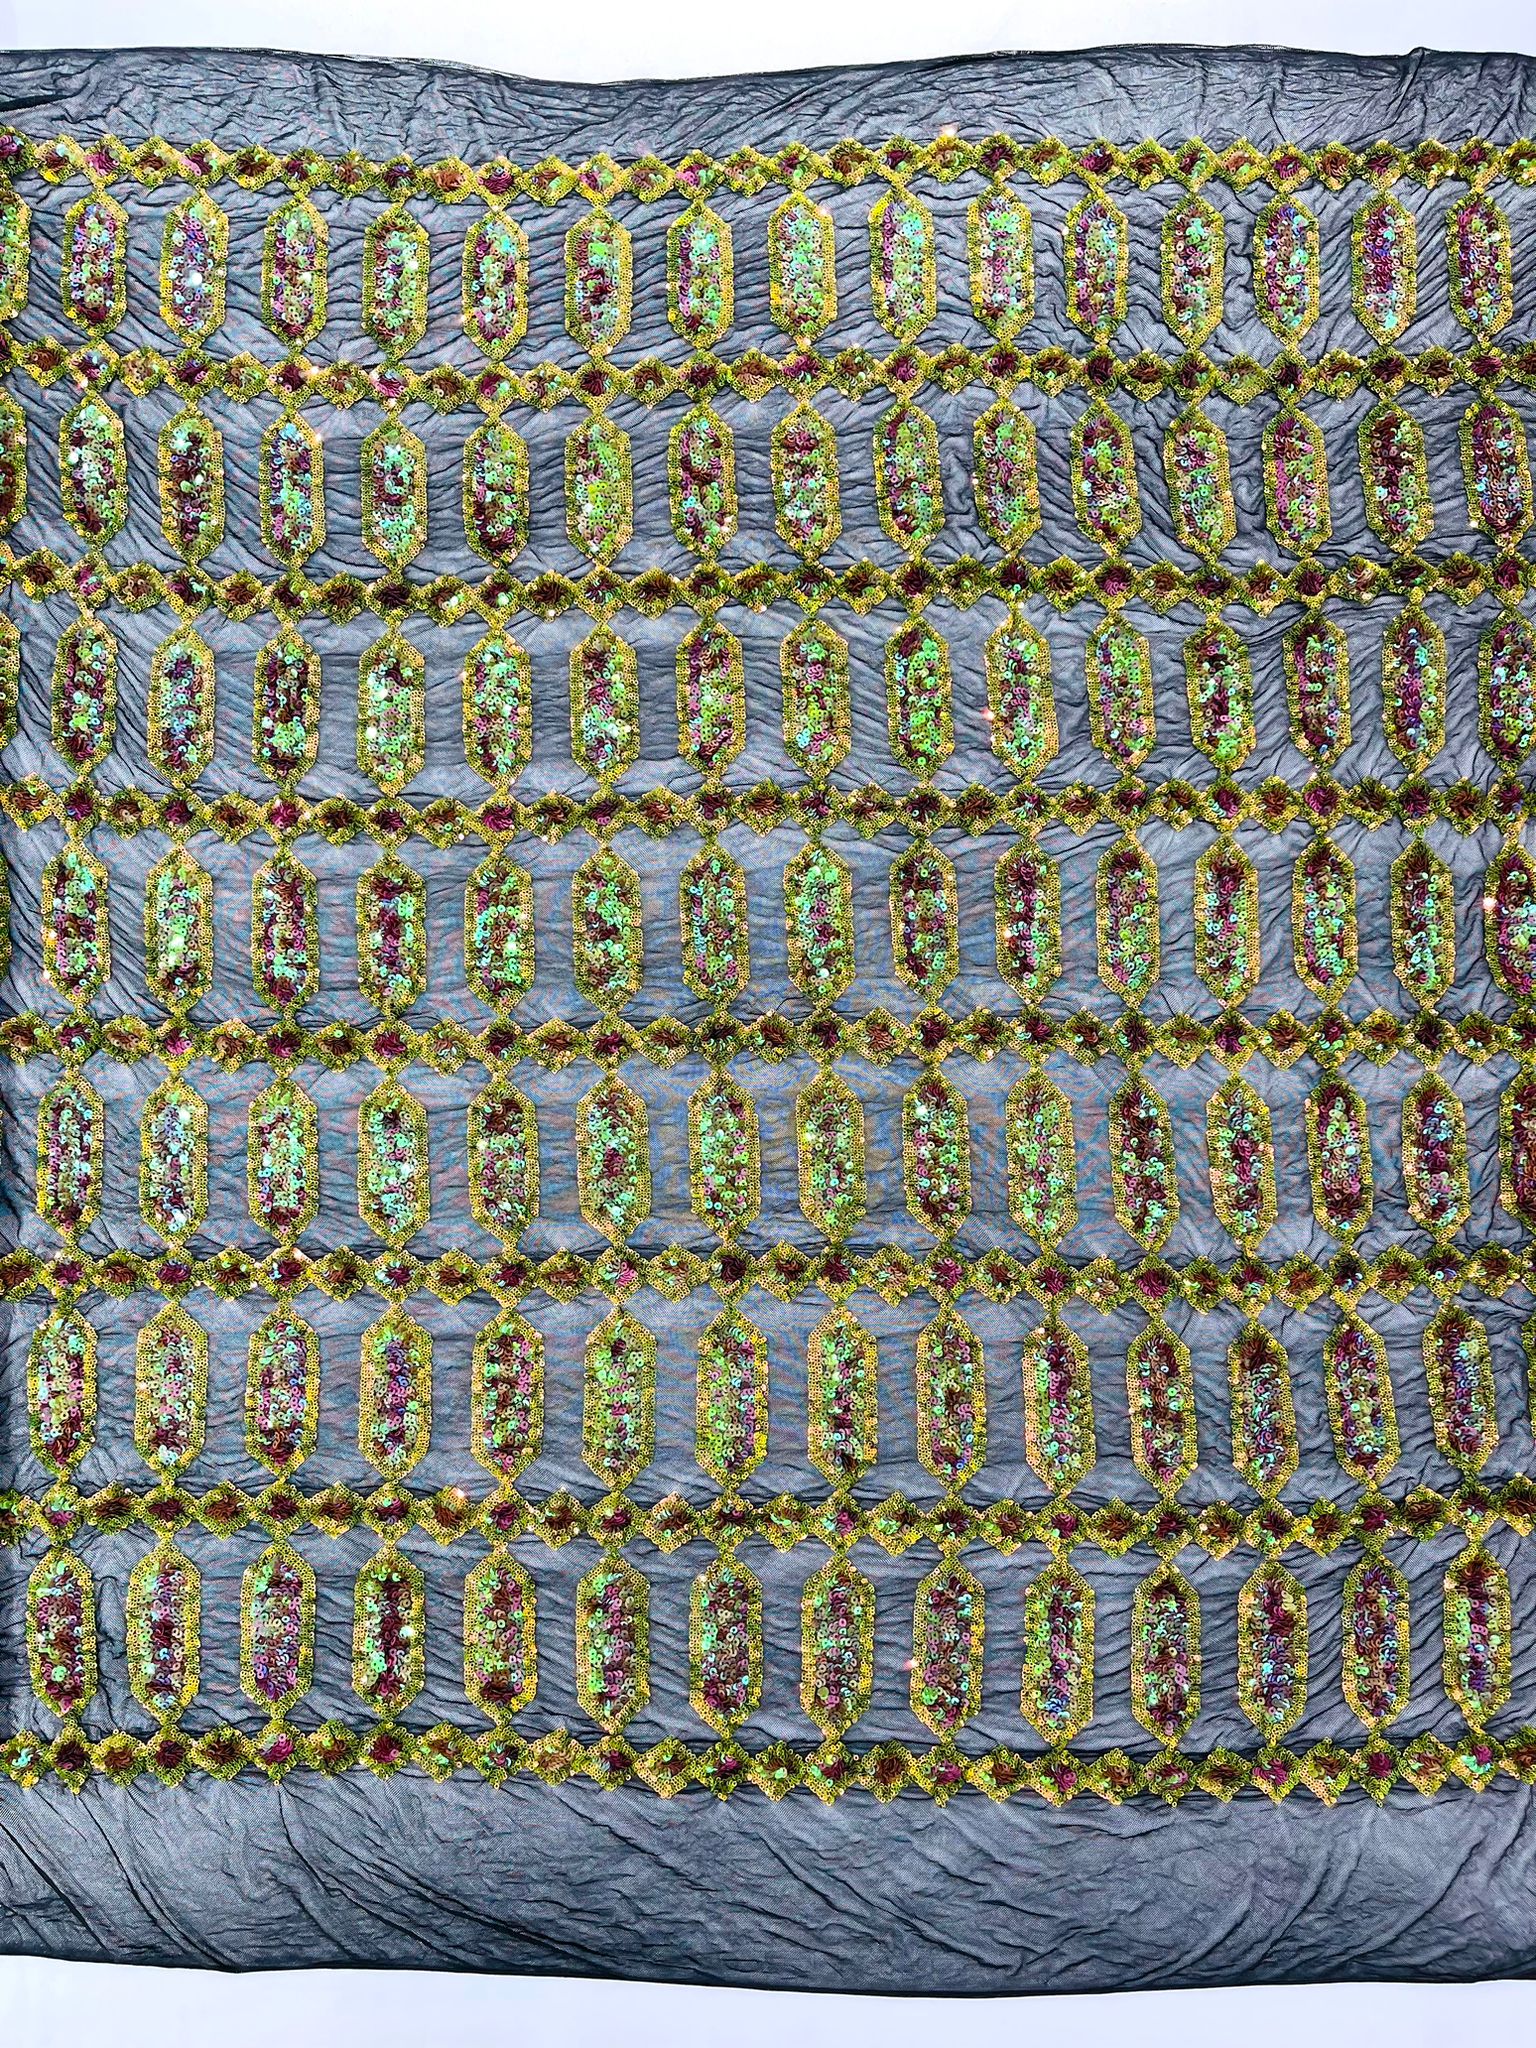 Moss Green/pink coral multi color iridescent Jewel sequin design on a black 4 way stretch mesh fabric.